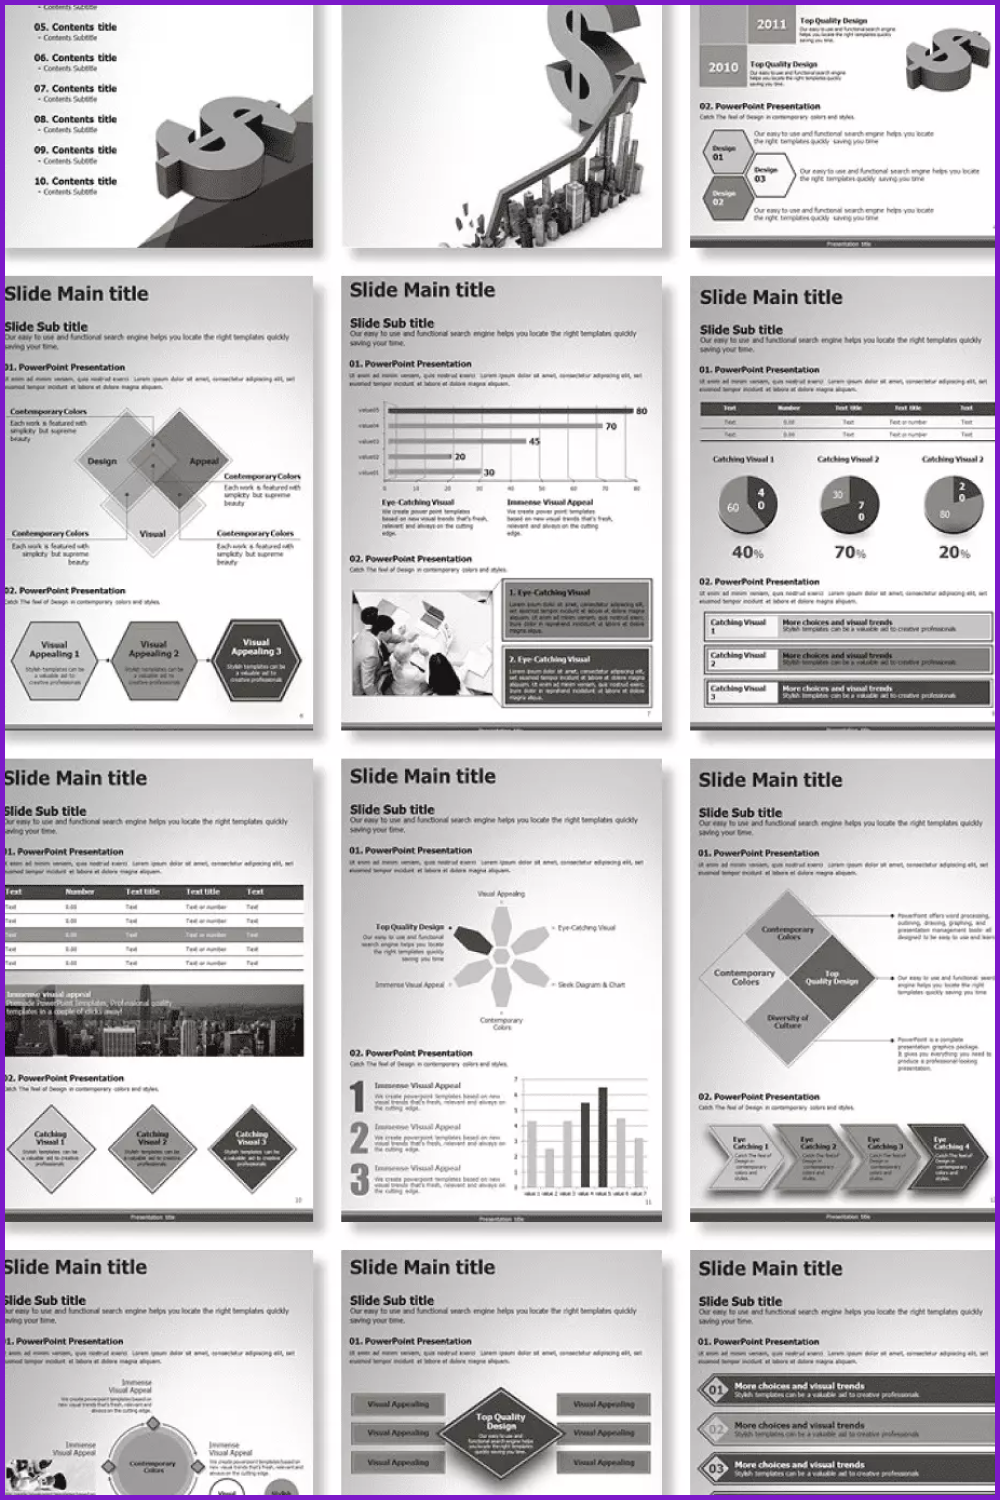 Presentation slides with financial infographics in gray scale